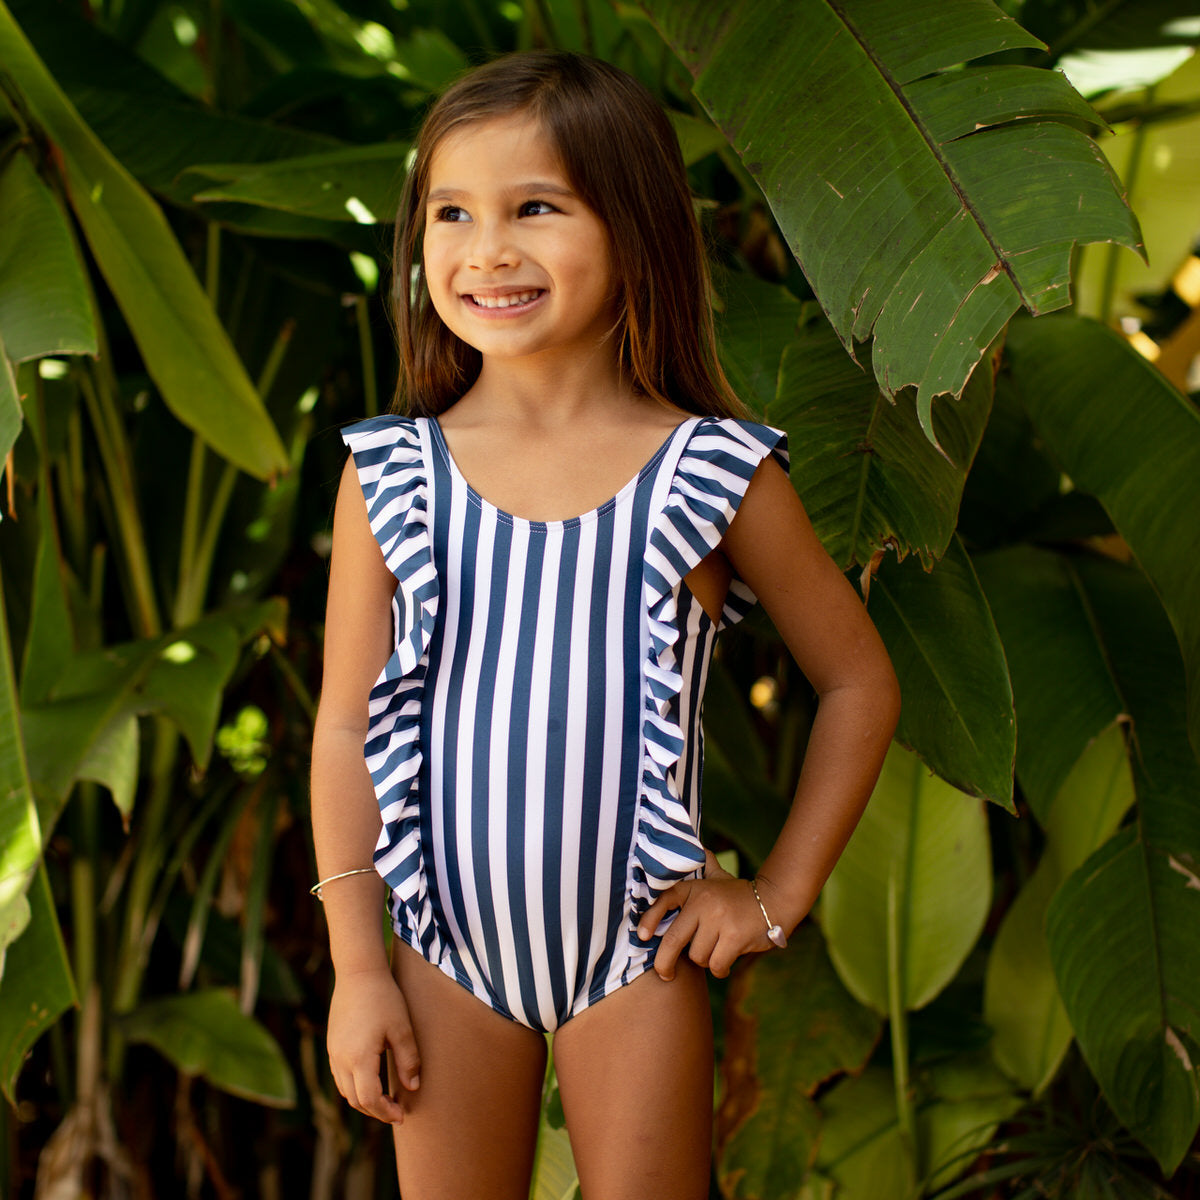 Mix and Match Swimwear for Kids - Walking in Memphis in High Heels